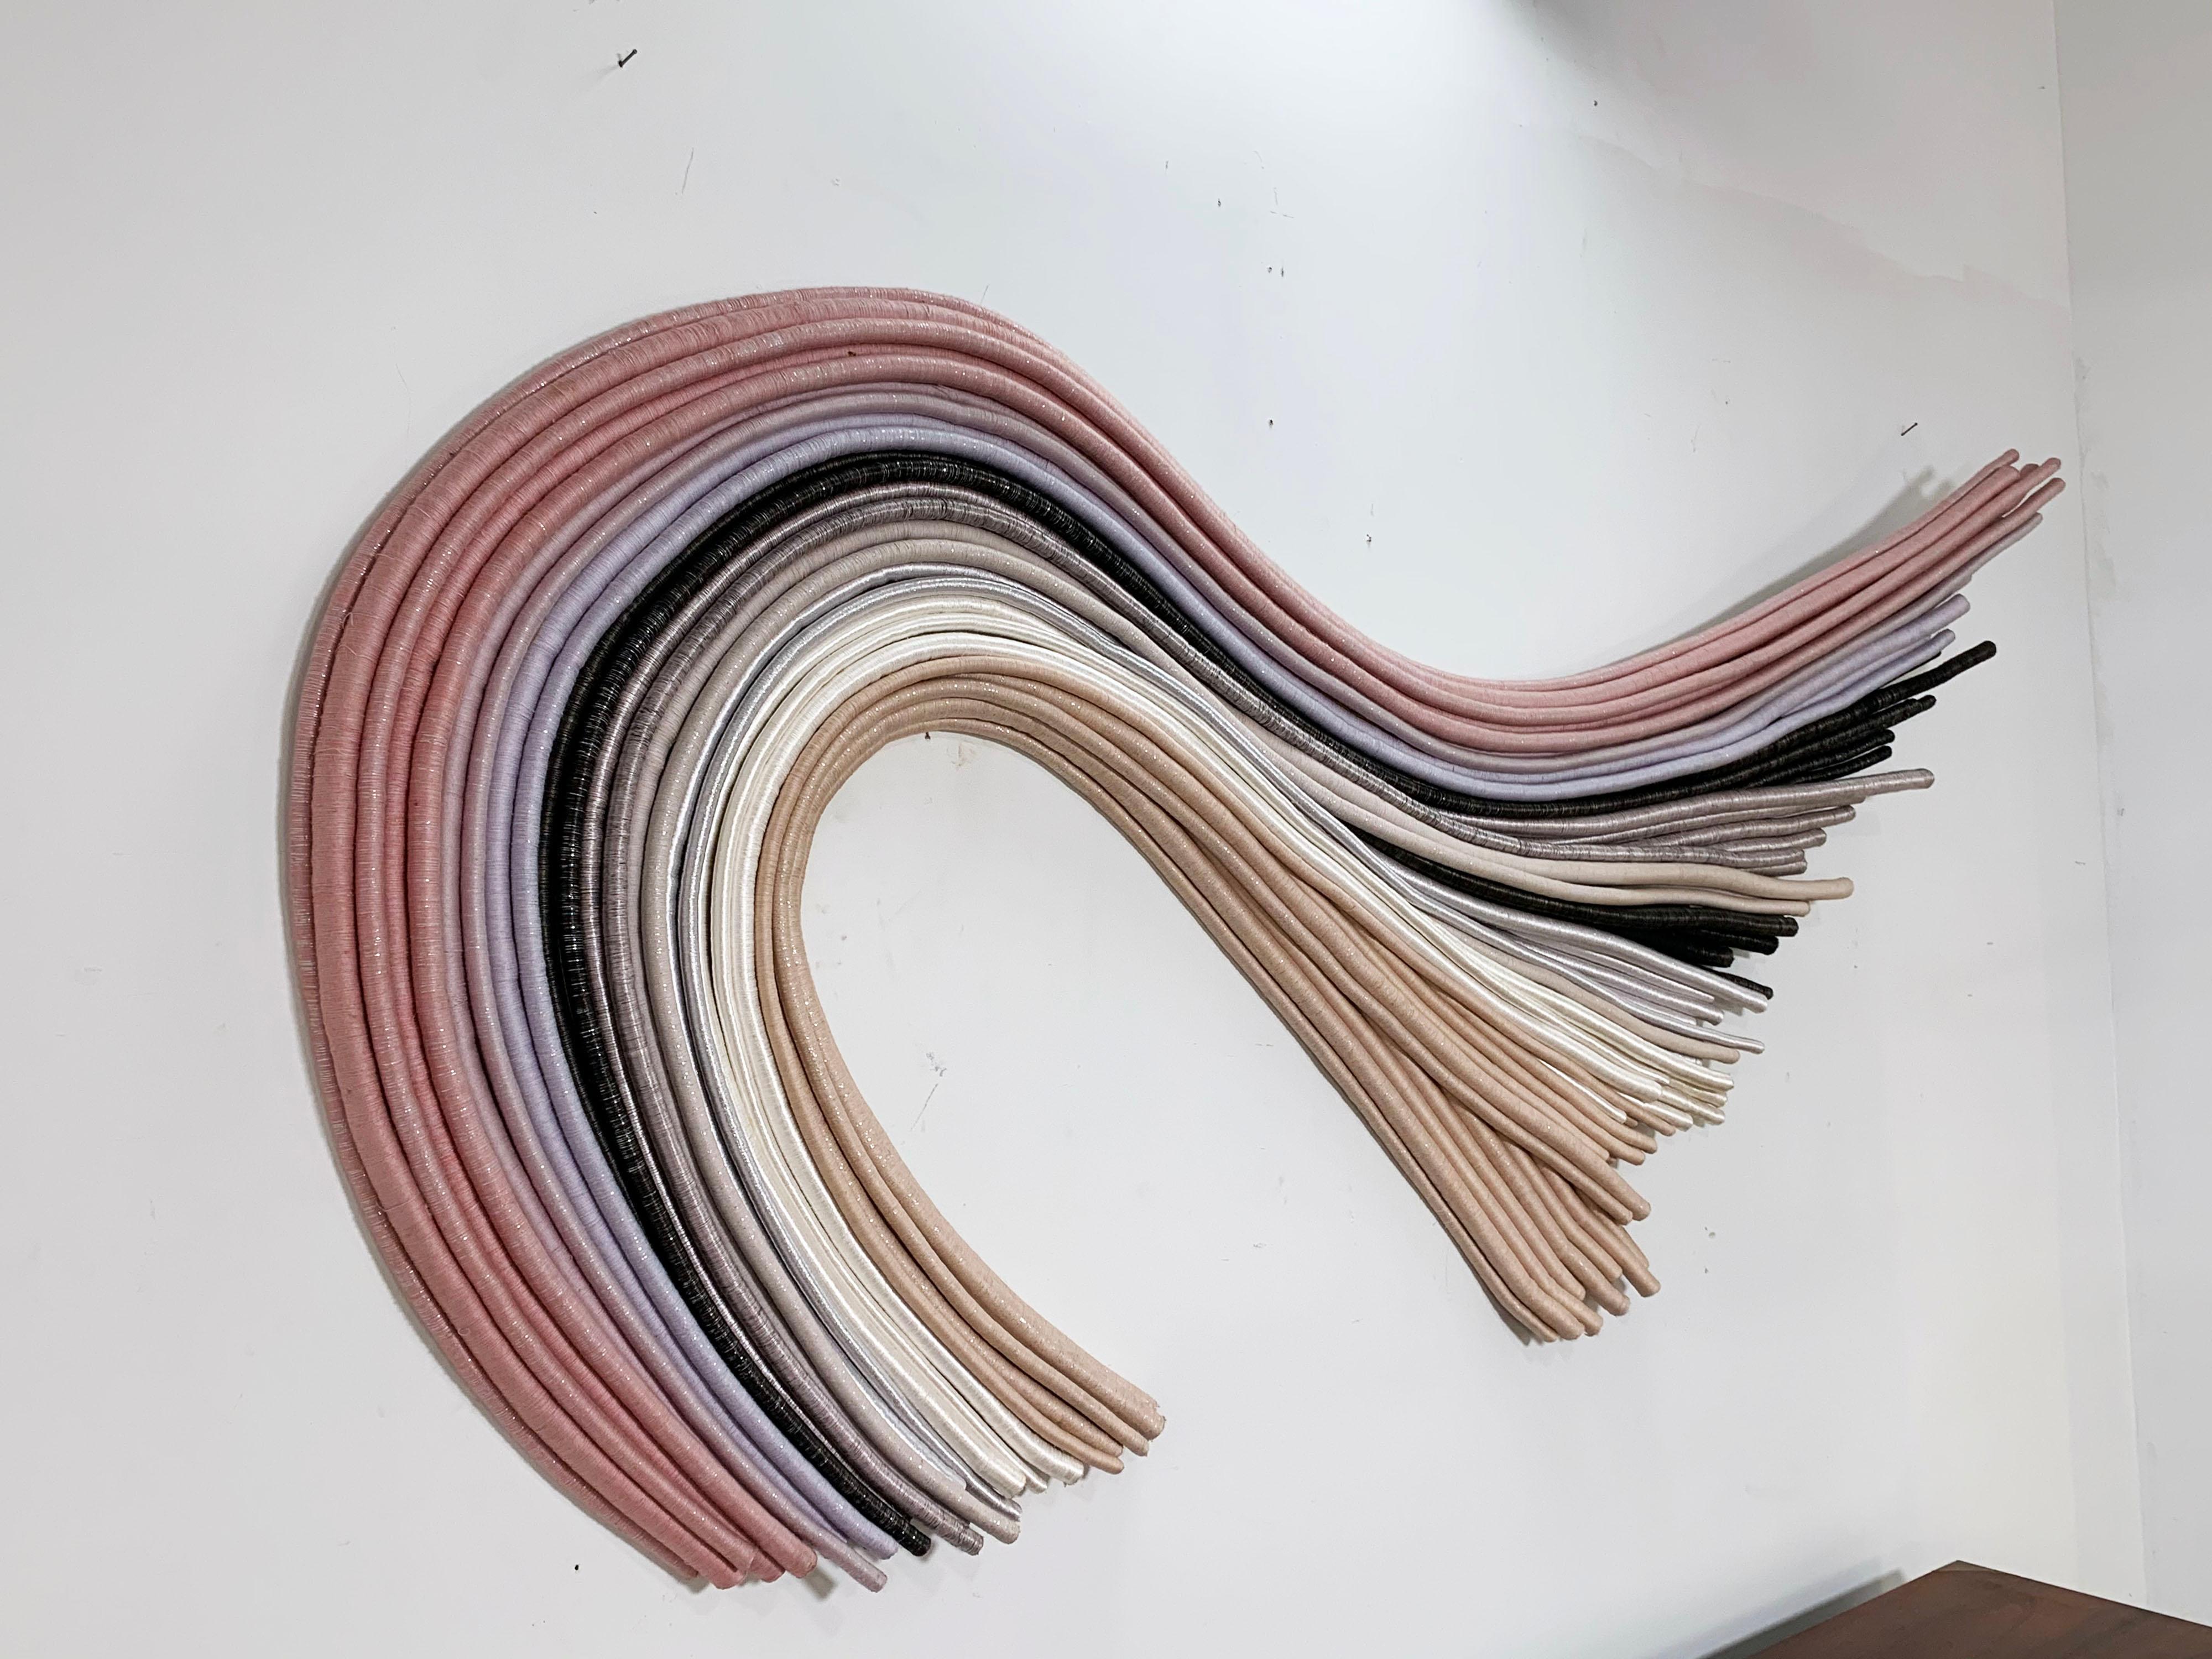 Oversized, 8 foot long wall-mounted fiber art sculpture by textile artist Barbara Barron, circa 1980s. Barron is a noted artist whose works are readily recognizable from her technique of wrapping fibers into tube like rods. She is also an